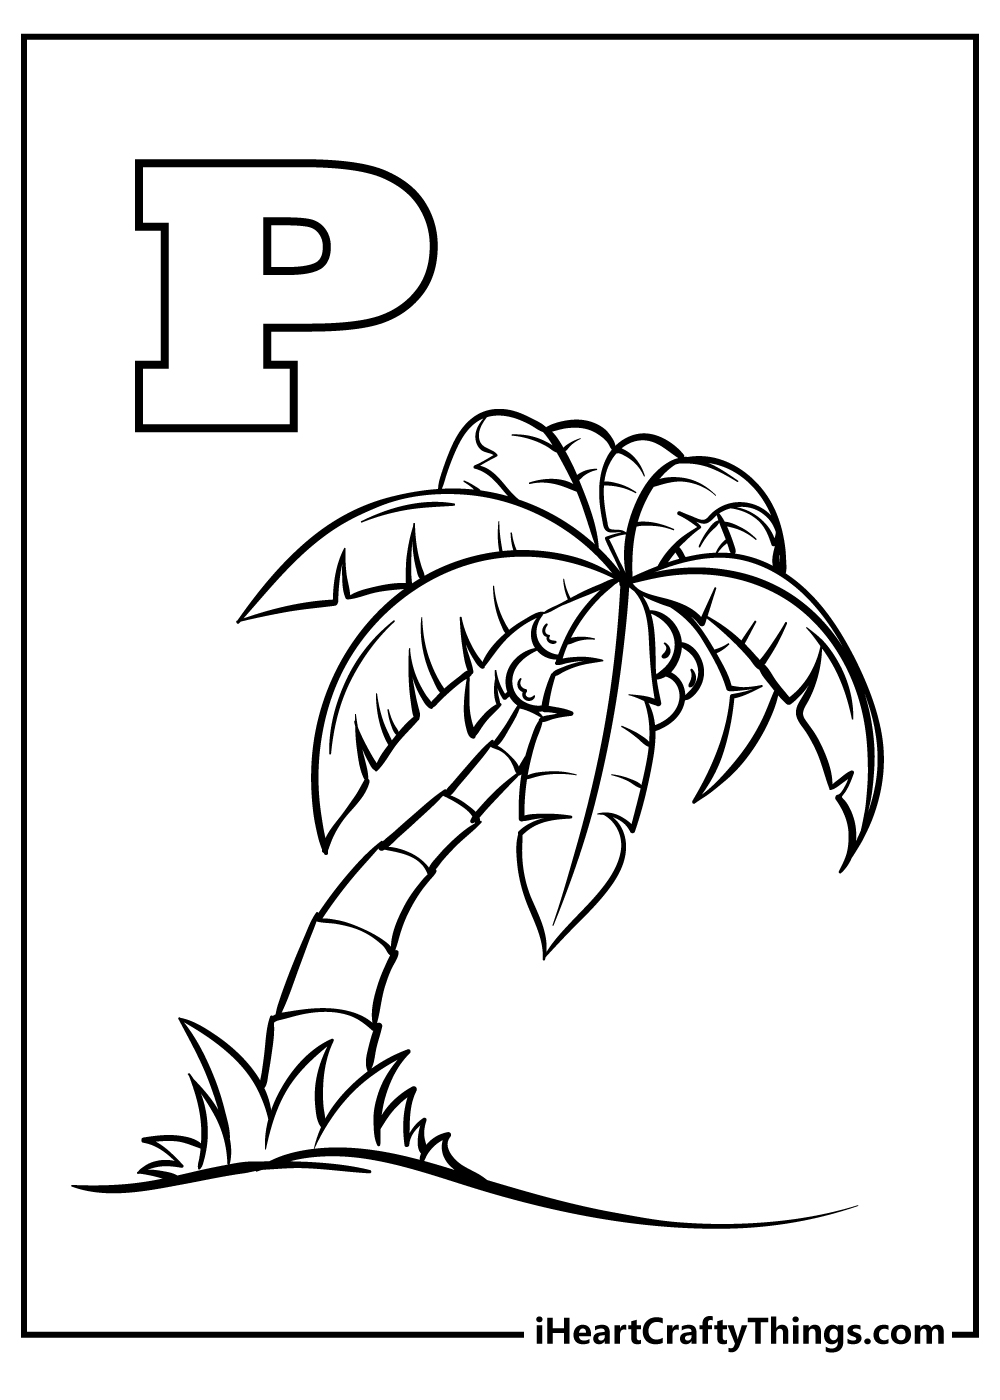 Letter P Coloring Pages for adults free printable